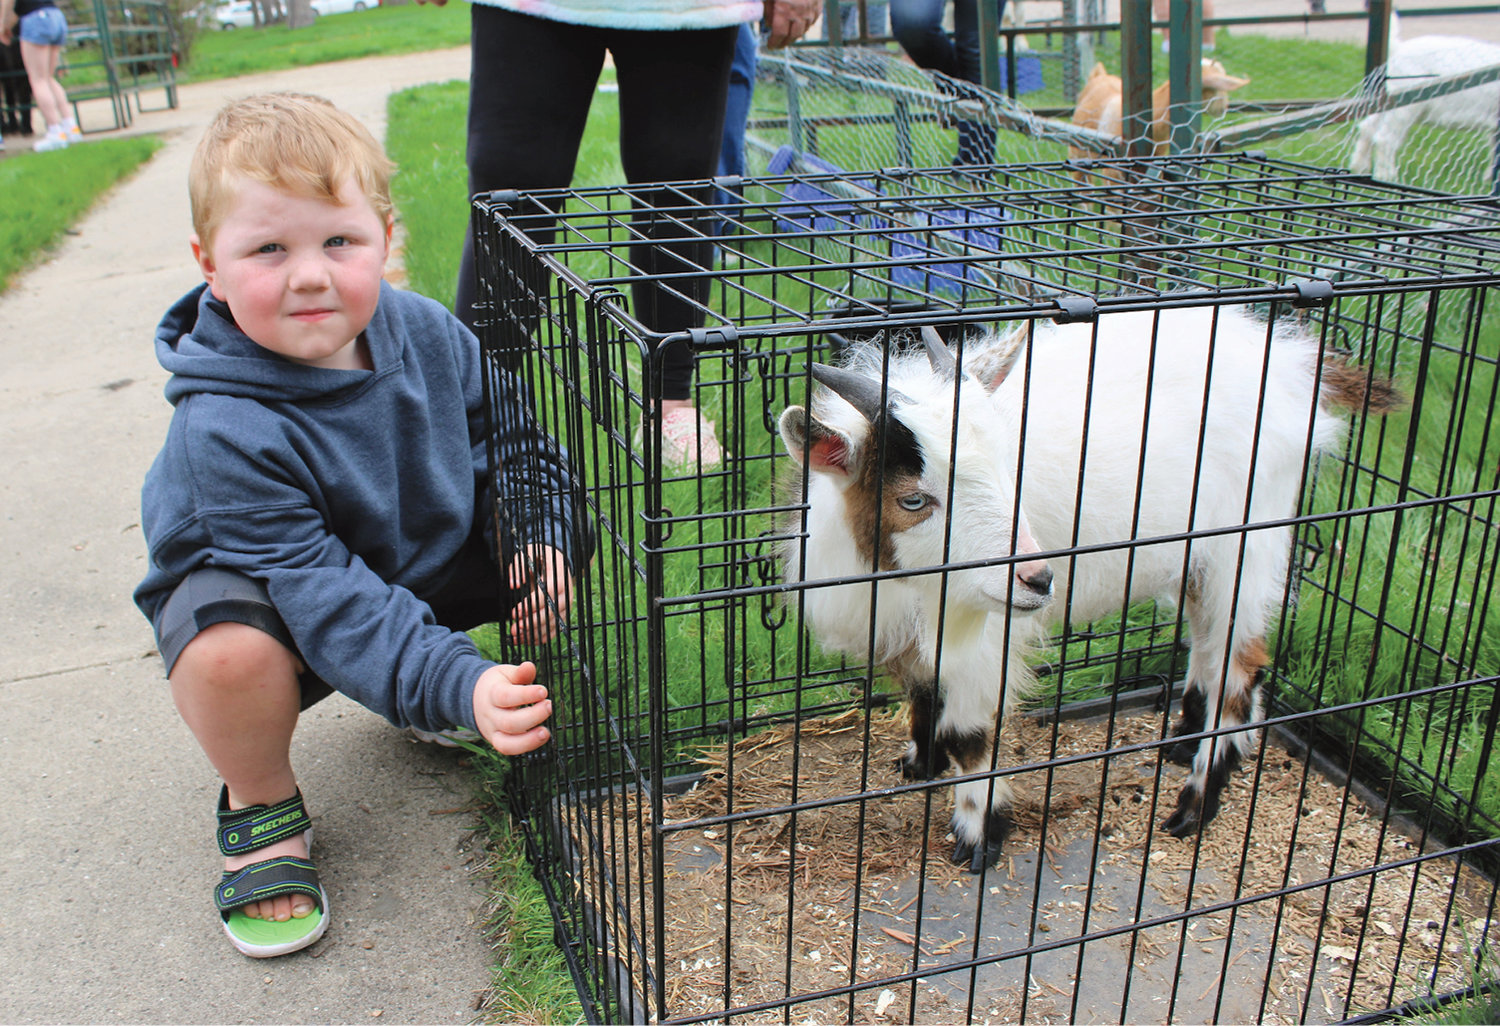 Lawrence Nelson hangs out with a baby goat.